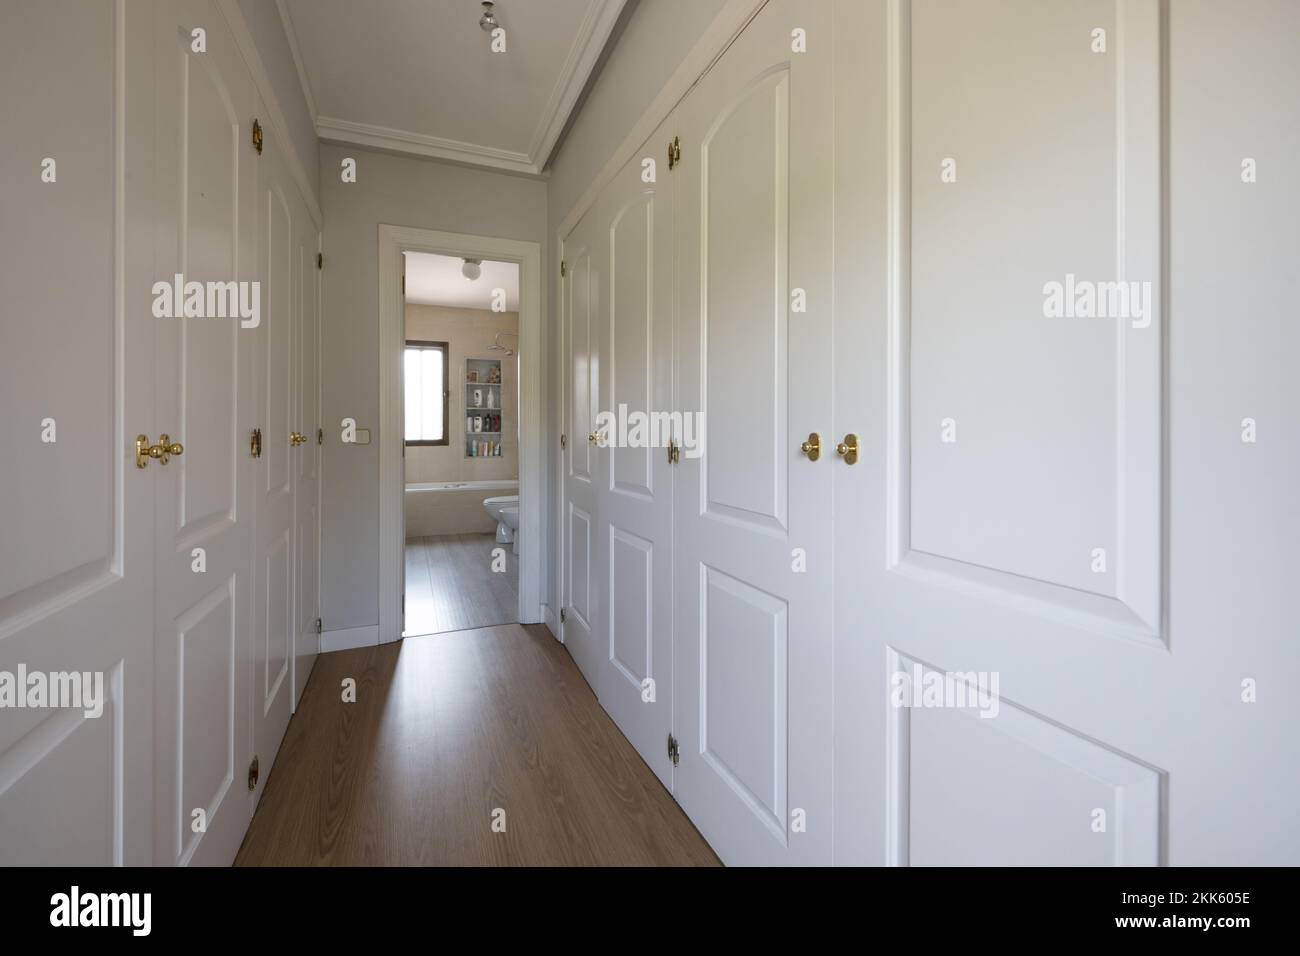 Empty room with white lacquered wooden built-in wardrobes forming a dressing room corridor with access to an en-suite bathroom Stock Photo